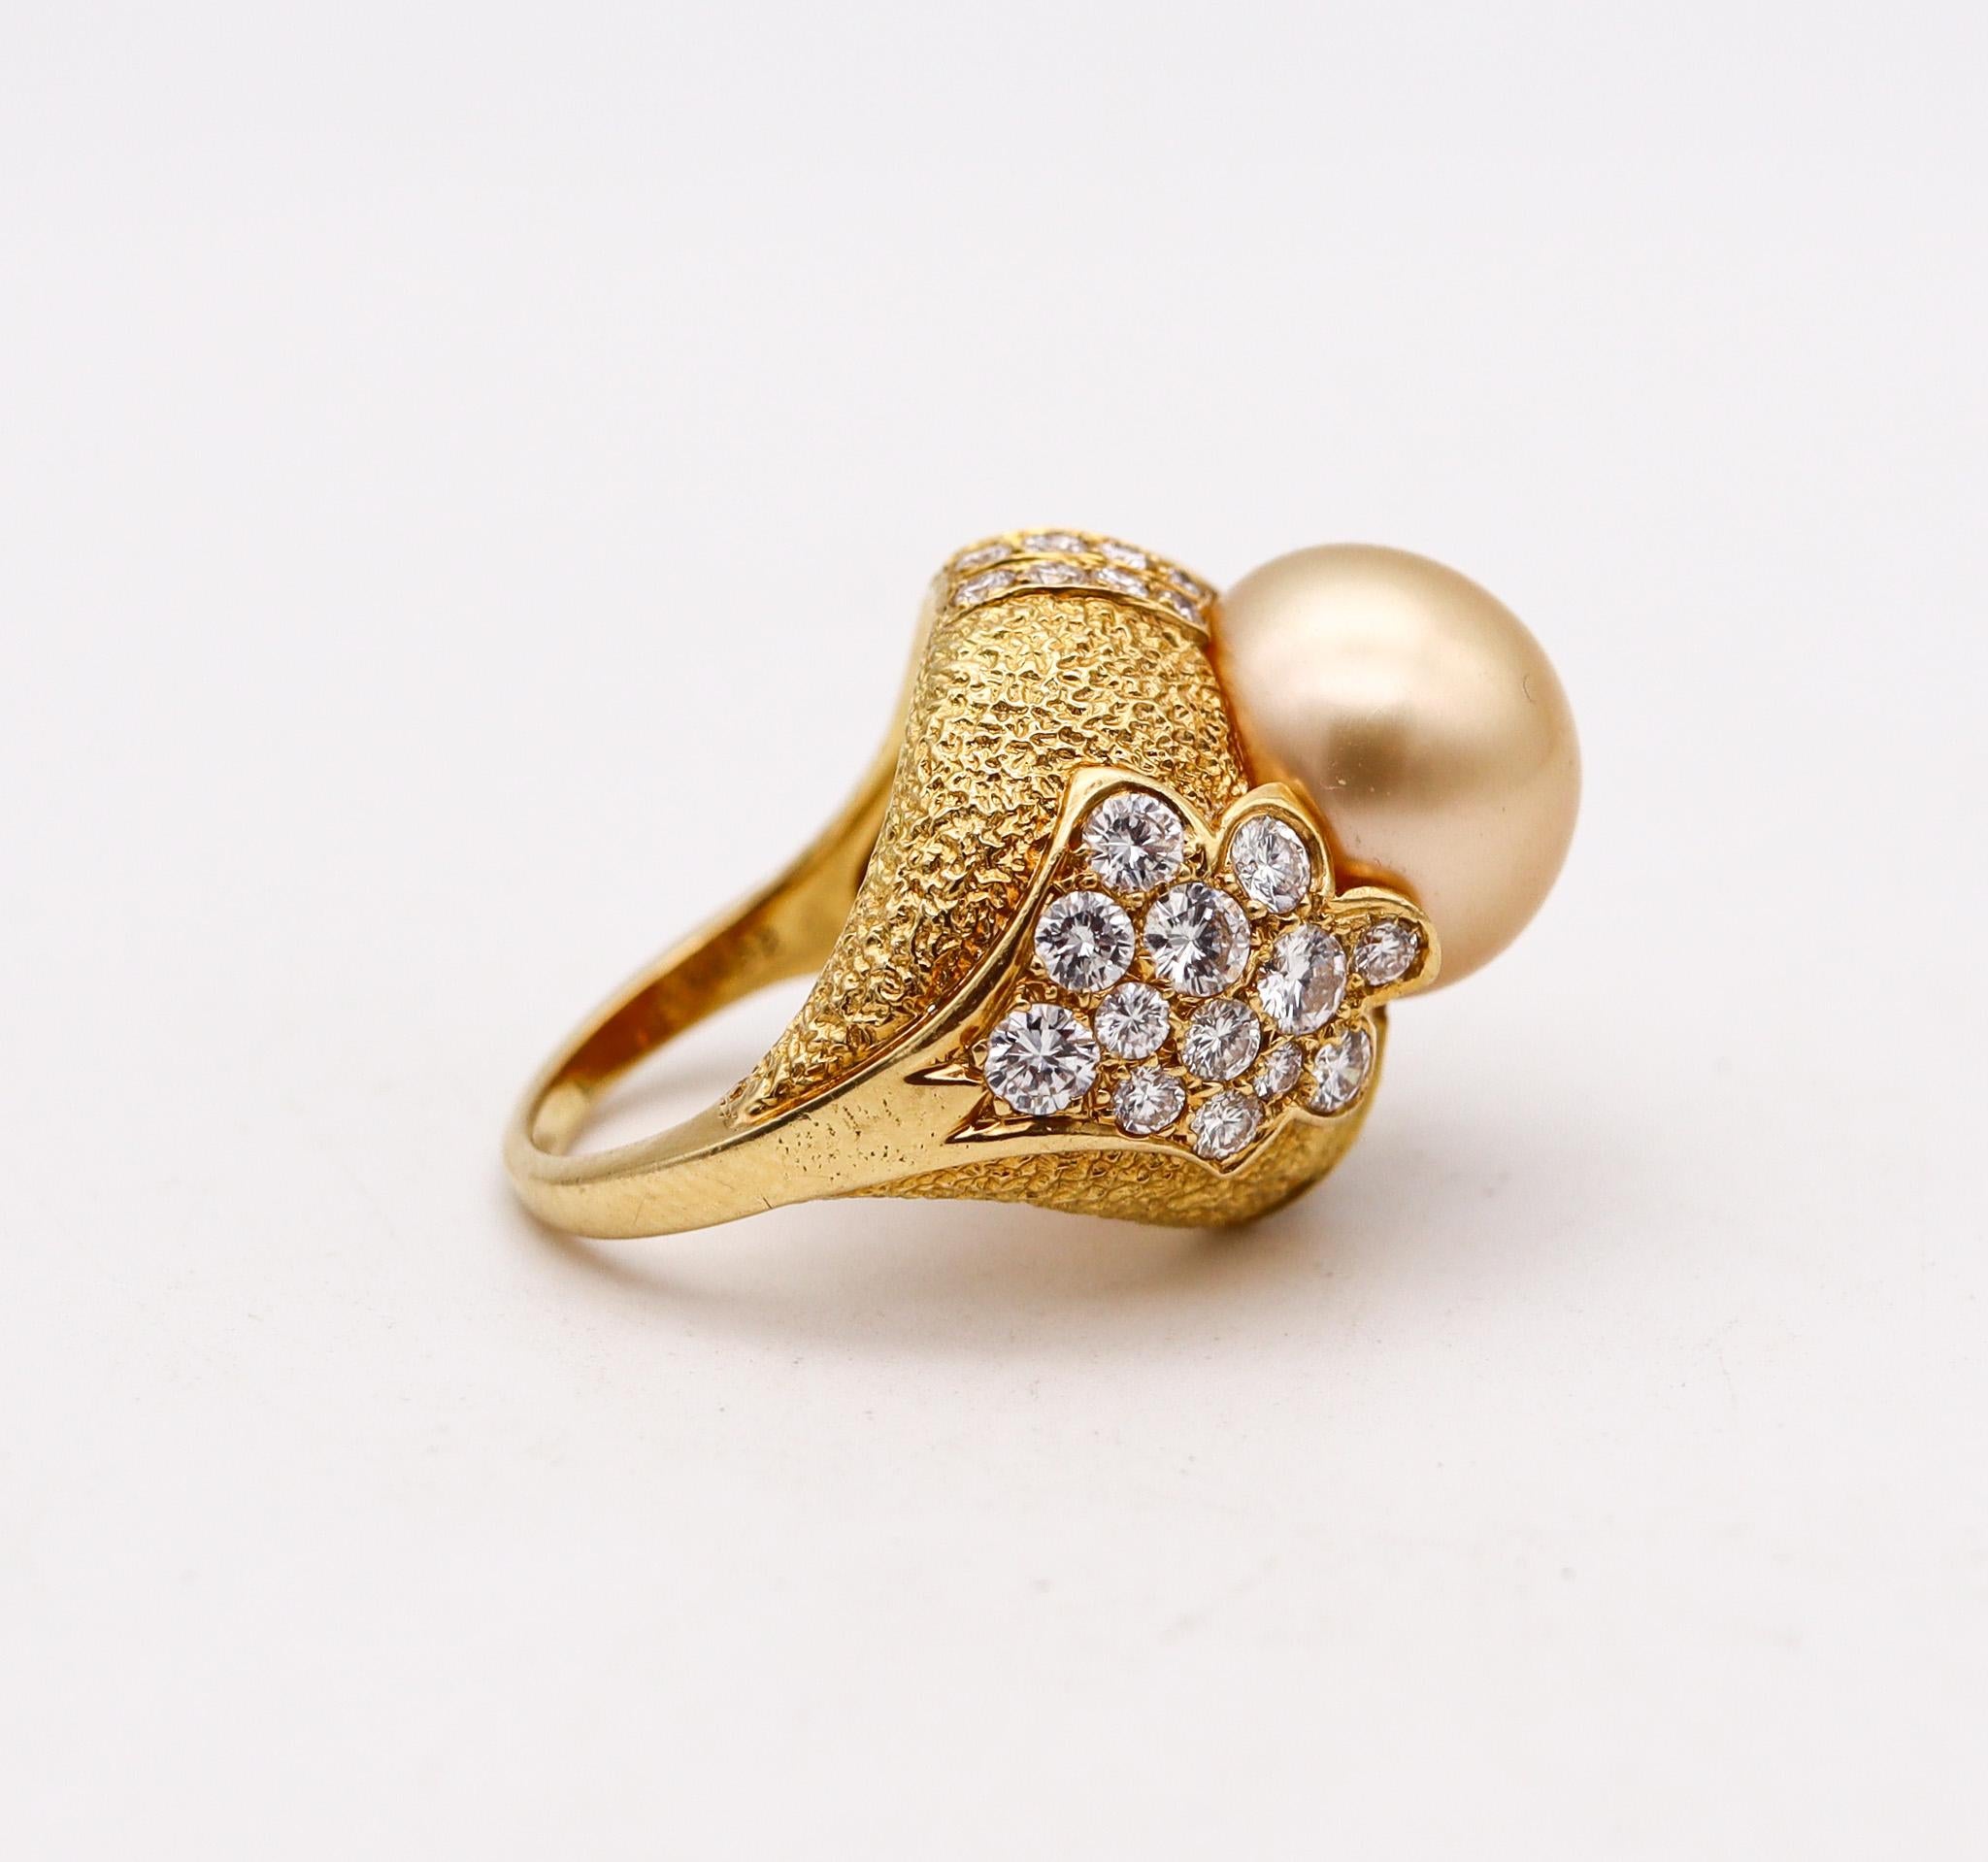 Modernist Van Cleef & Arpels Golden Pearl Cocktail Ring 18Kt Gold With 3.46 Ctw Diamonds For Sale